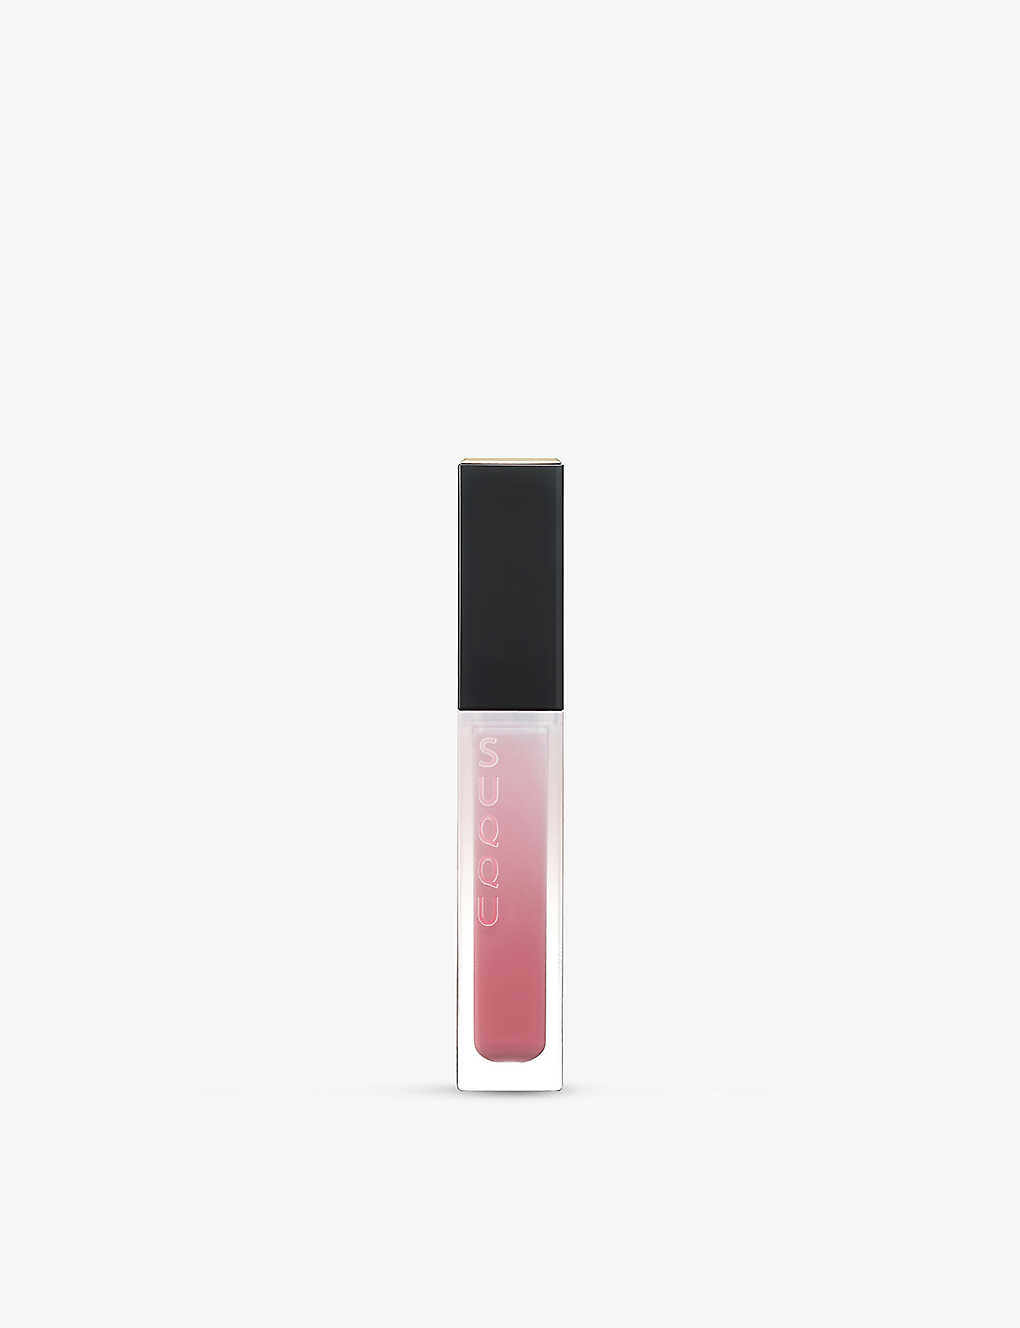 Suqqu 05 Candy Pink Treatment Wrapping Lip Gloss 5.4g